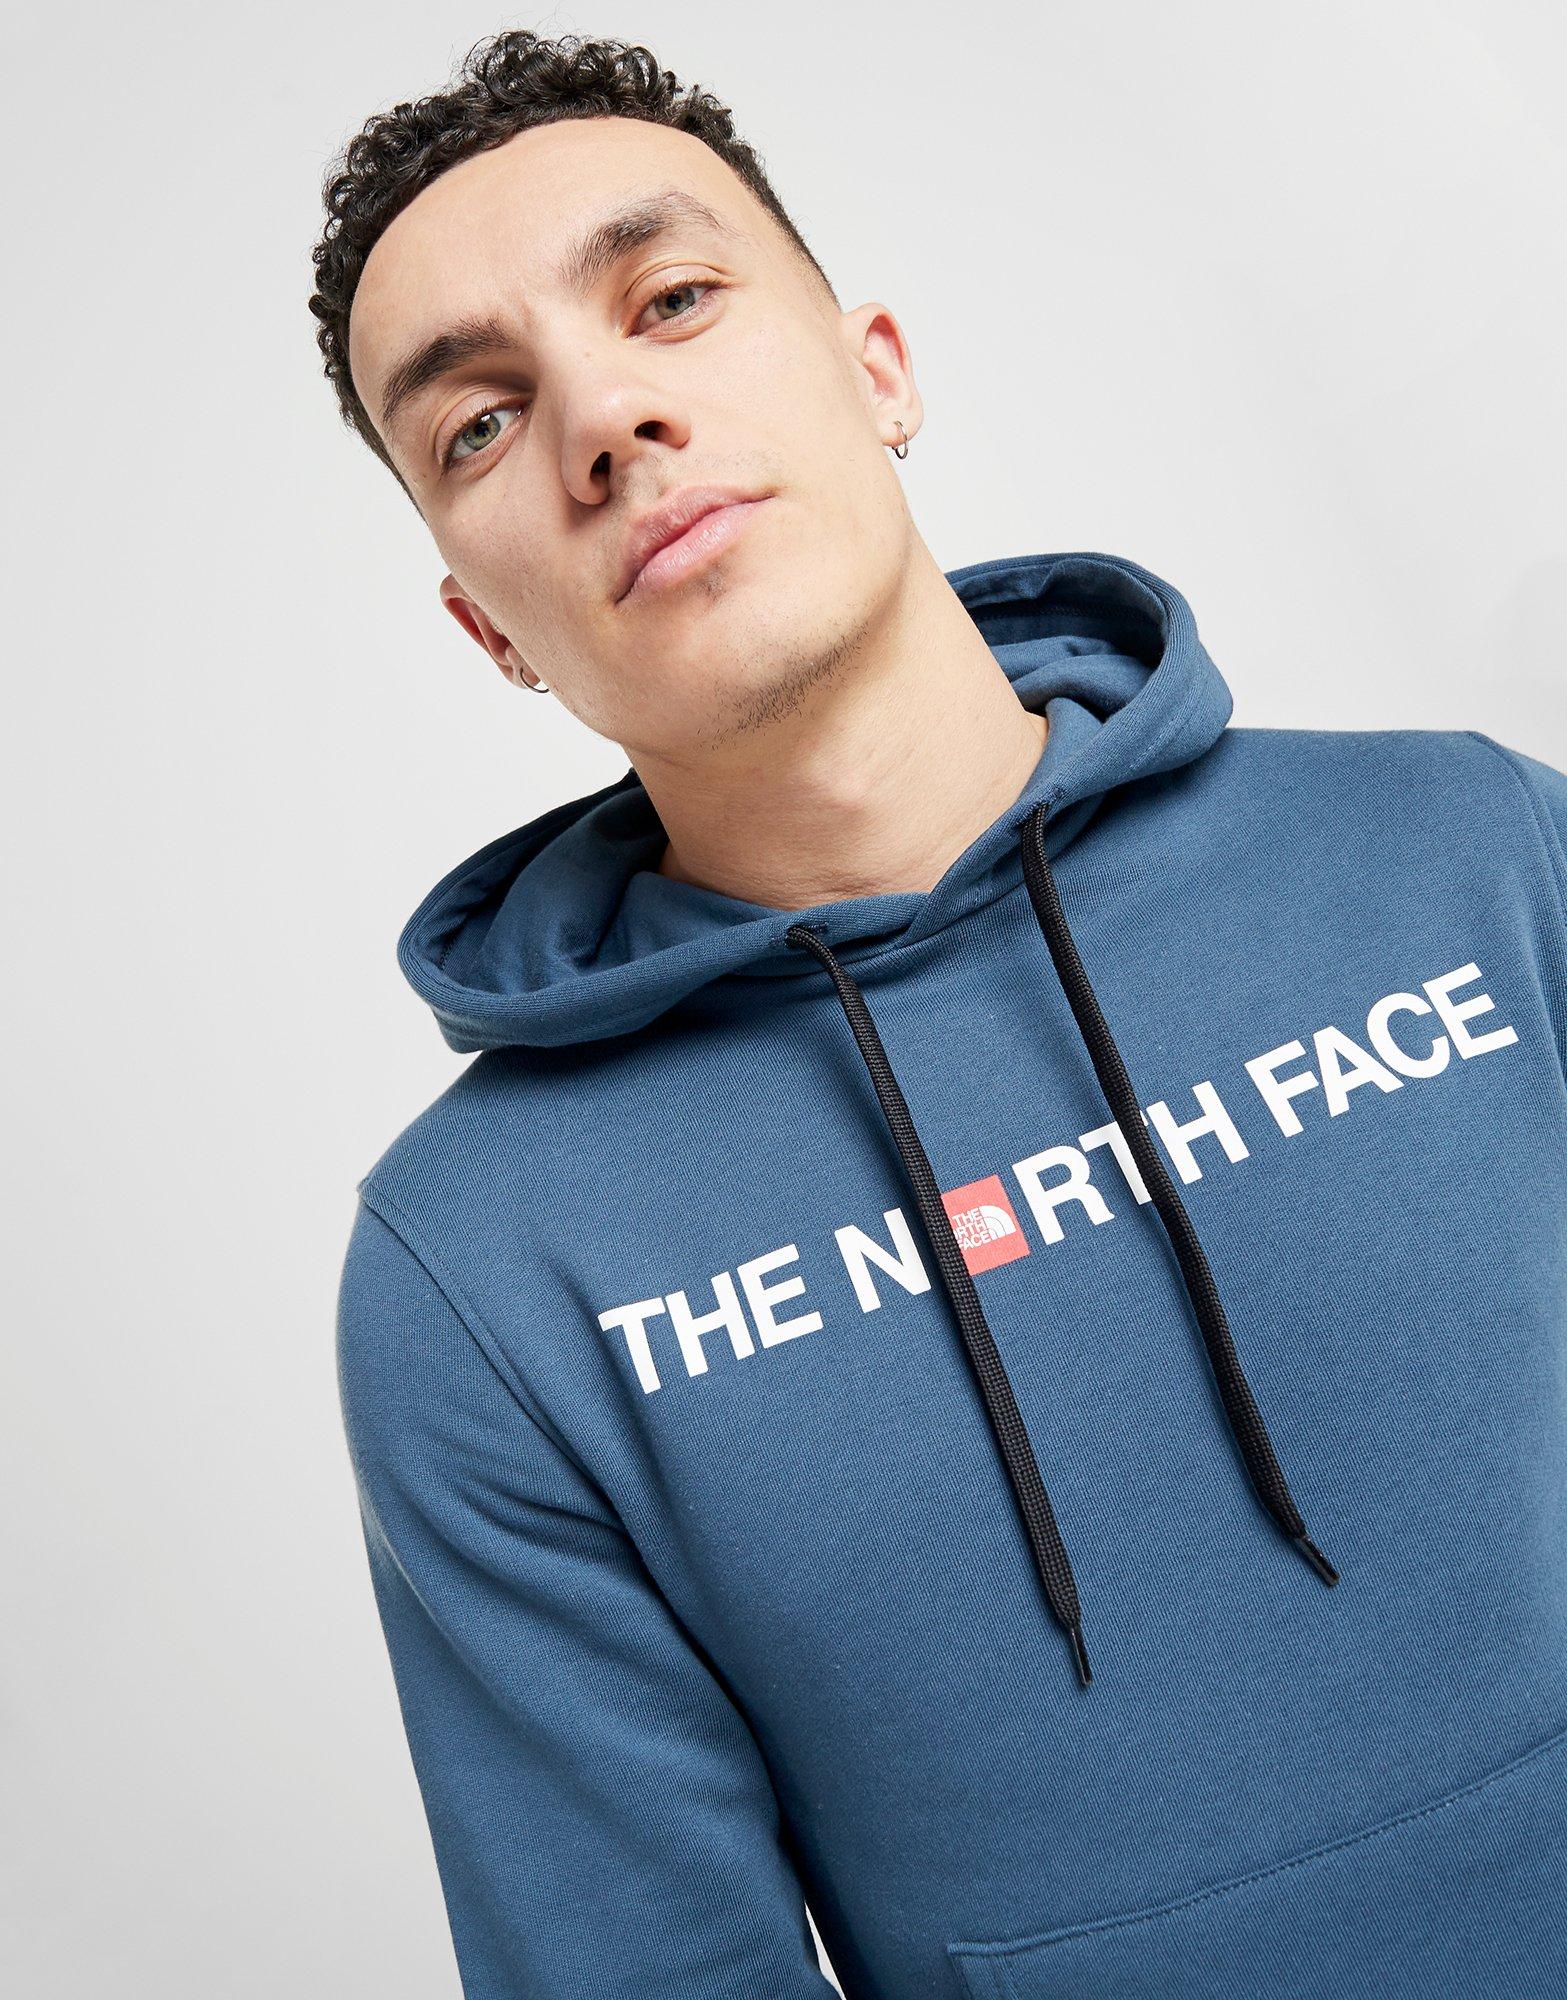 north face hoodie jd sports